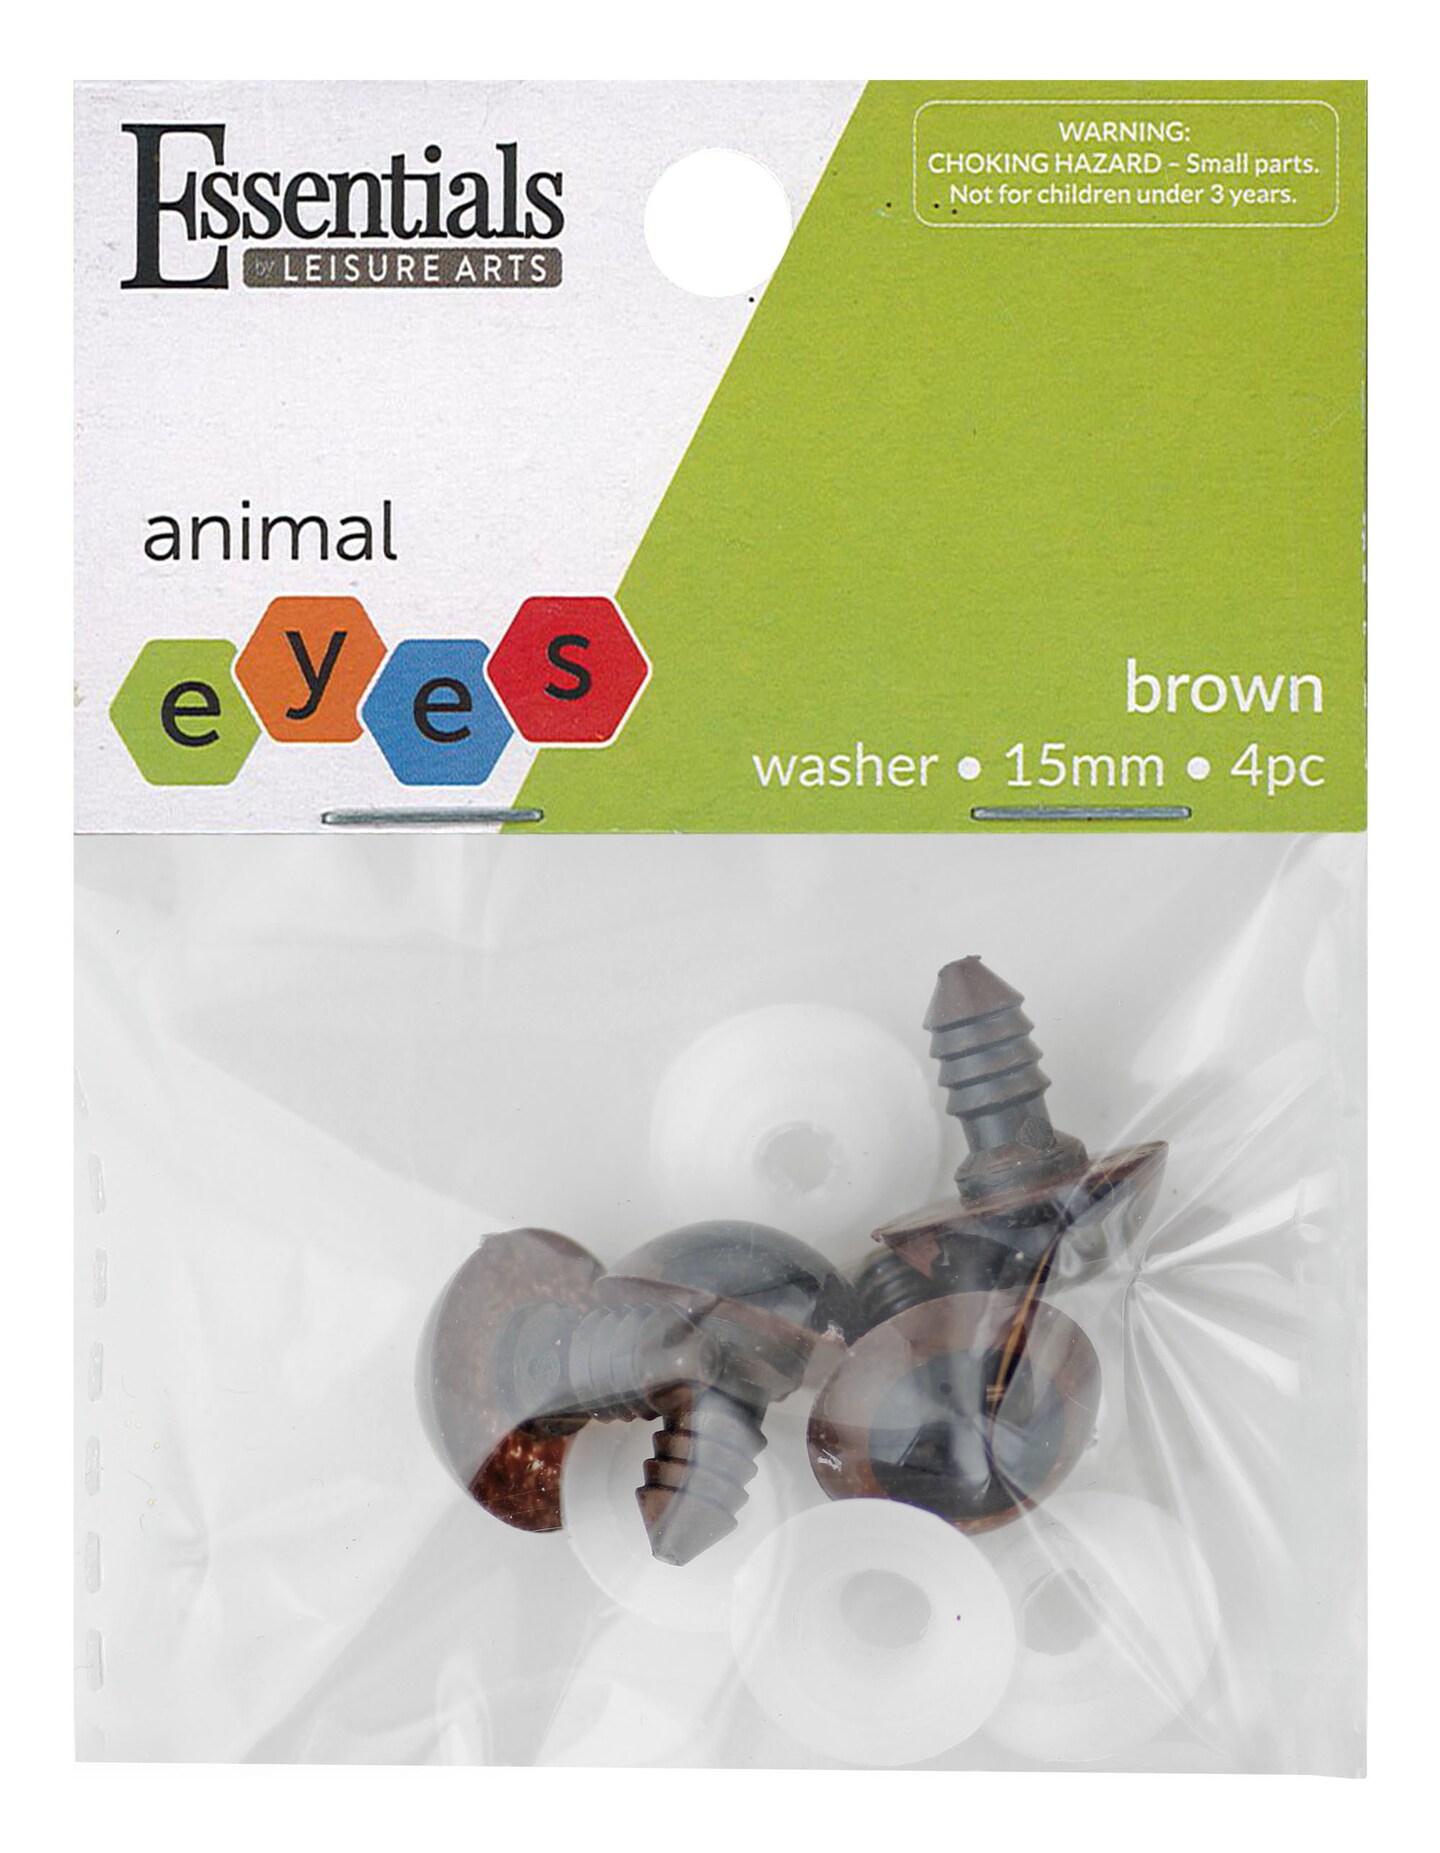 Essentials by Leisure Arts Eyes Solid with Washer Brown, 15mm, 4 pieces Googly Eyes, Google Eyes for Crafts, Big Googly Eyes for Crafts, Wiggle Eyes, Craft Eyes